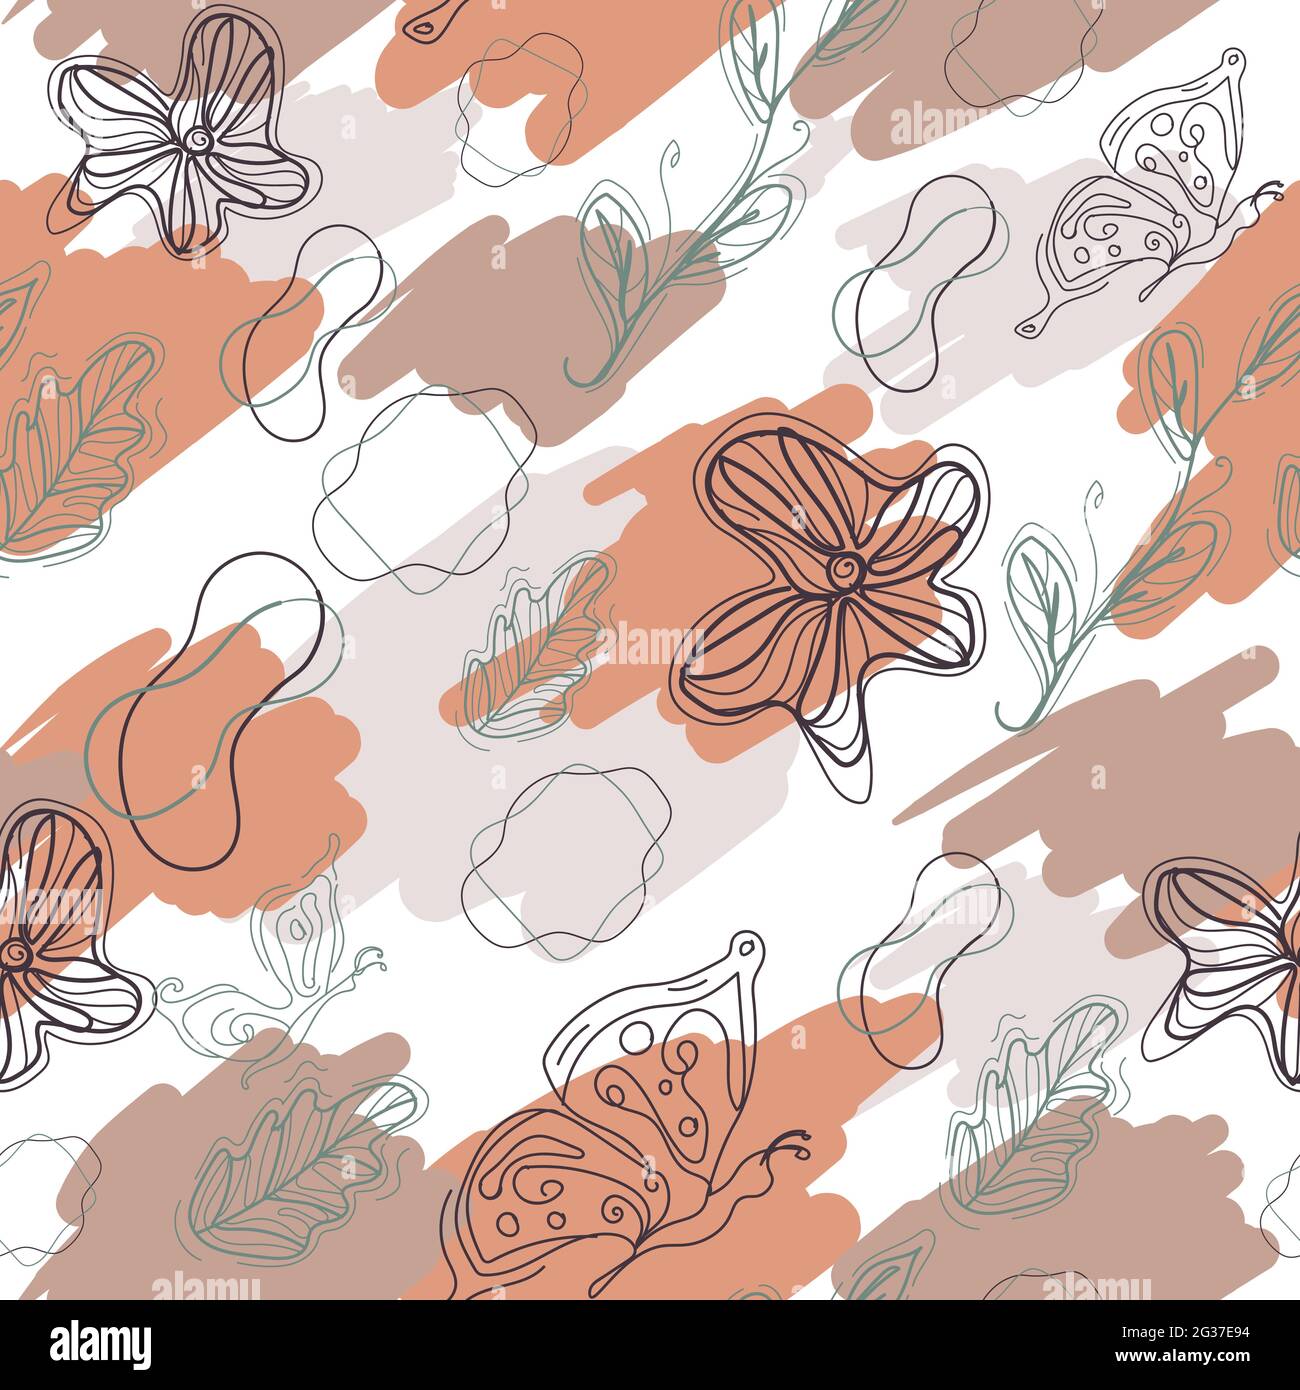 Minimal abstract wall painting. Line art seamless pattern with contour of butterflies, flowers, leaves and amoeba. Repeat background Stock Vector